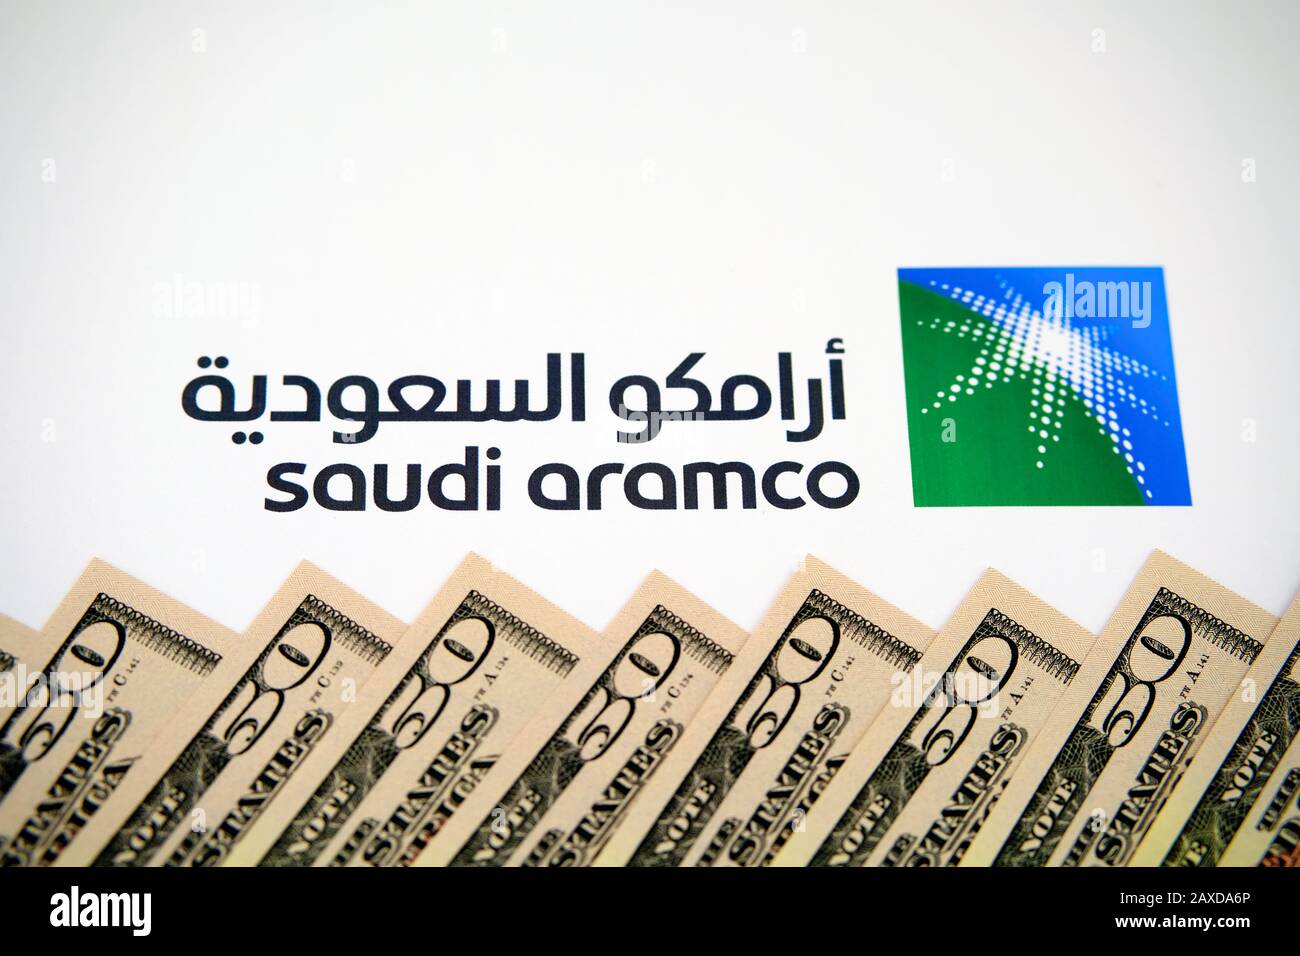 Saudi Aramco logo and stack of dollar banknotes. Saudi Arabian Oil Company is one of the largest companies in the world by revenue. Stock Photo